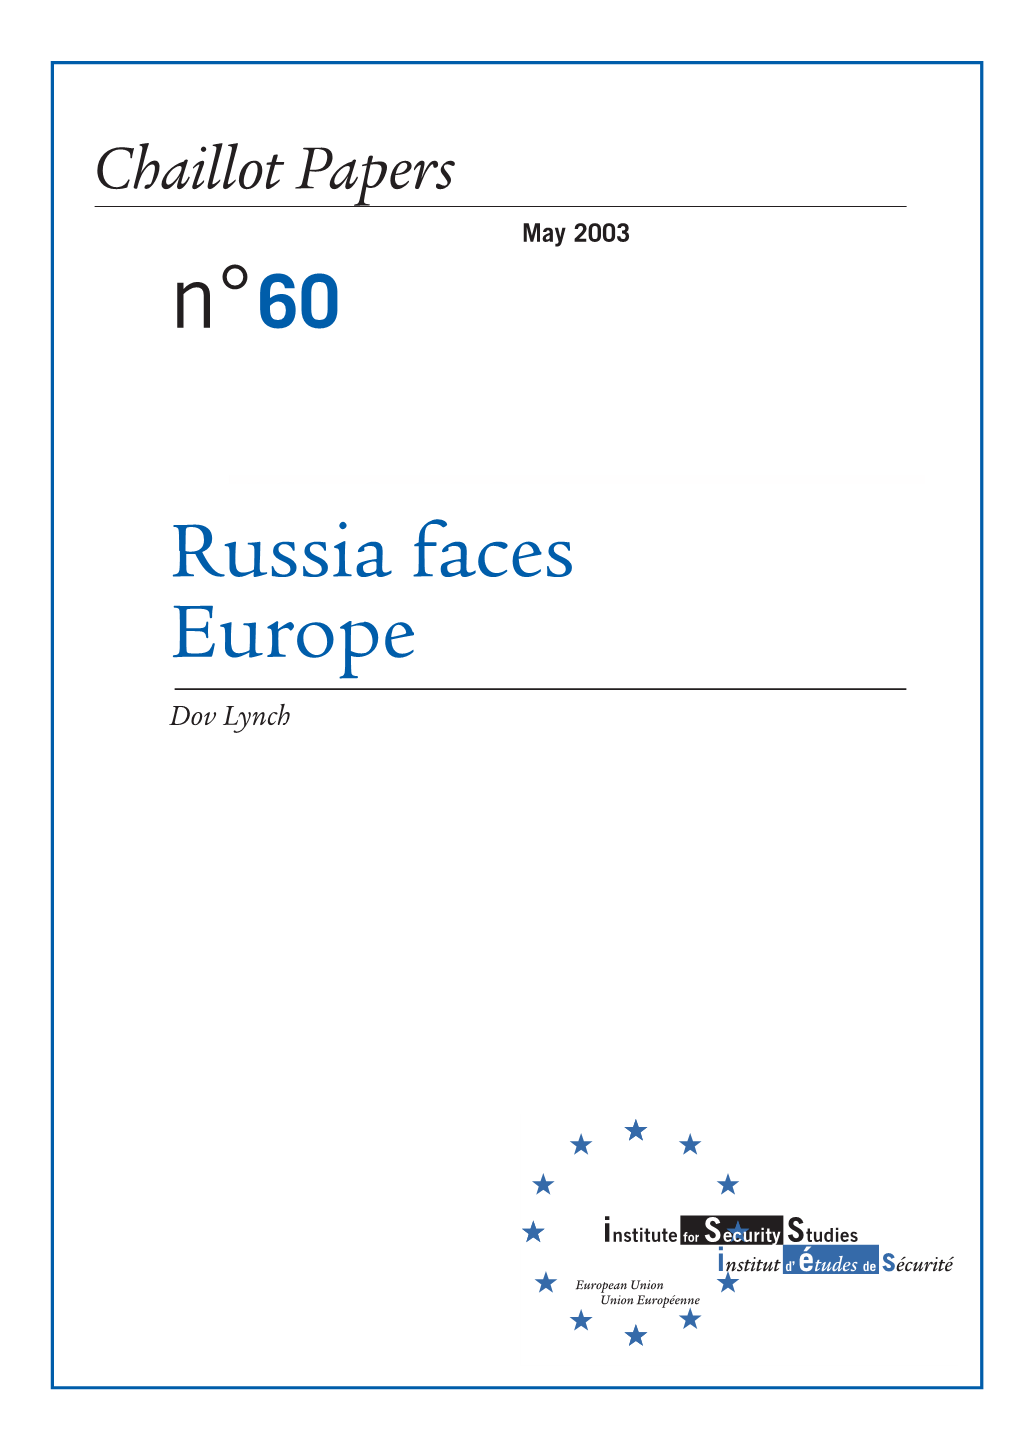 Russia Faces Europe Dov Lynch 60-Outside Cover-ENG.Qxd 14/05/2003 15:03 Page 2 Chaillot Papers N° 60